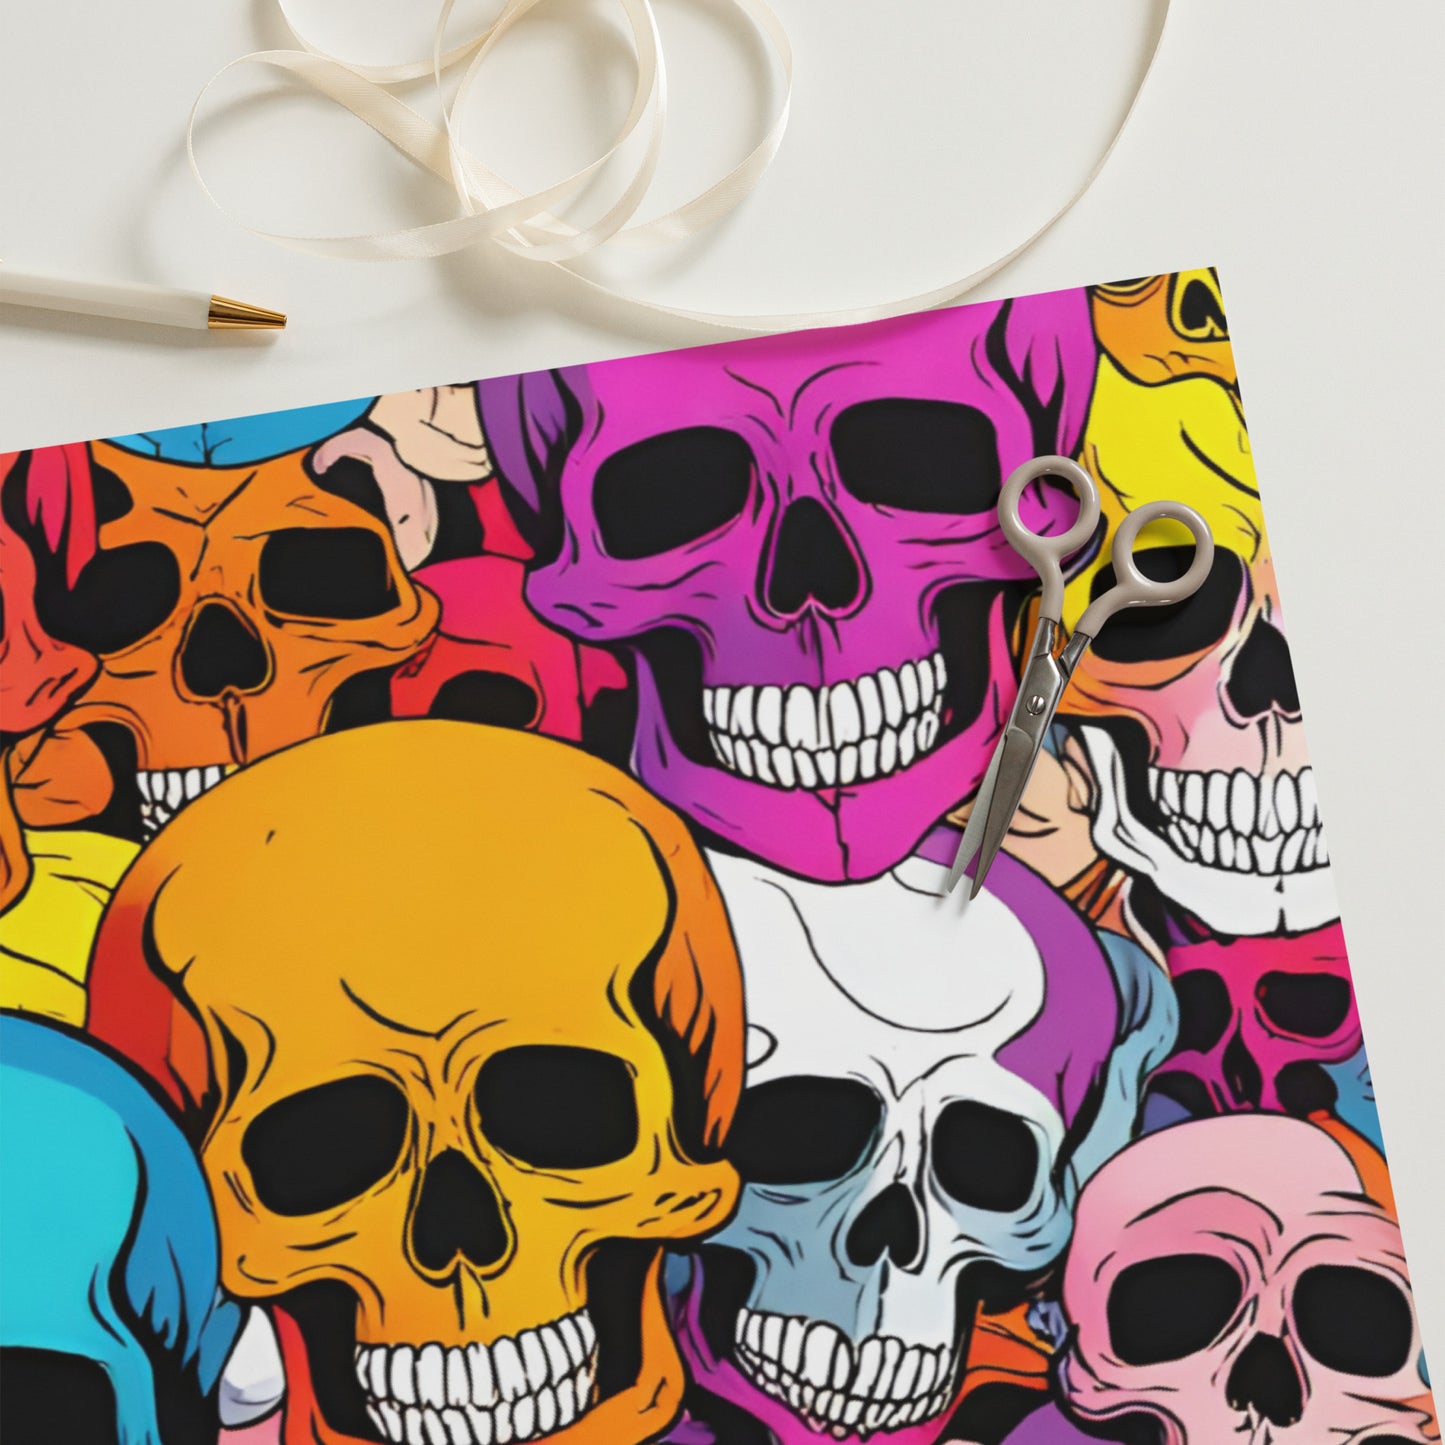 "Skulls" Wrapping paper sheets AccE